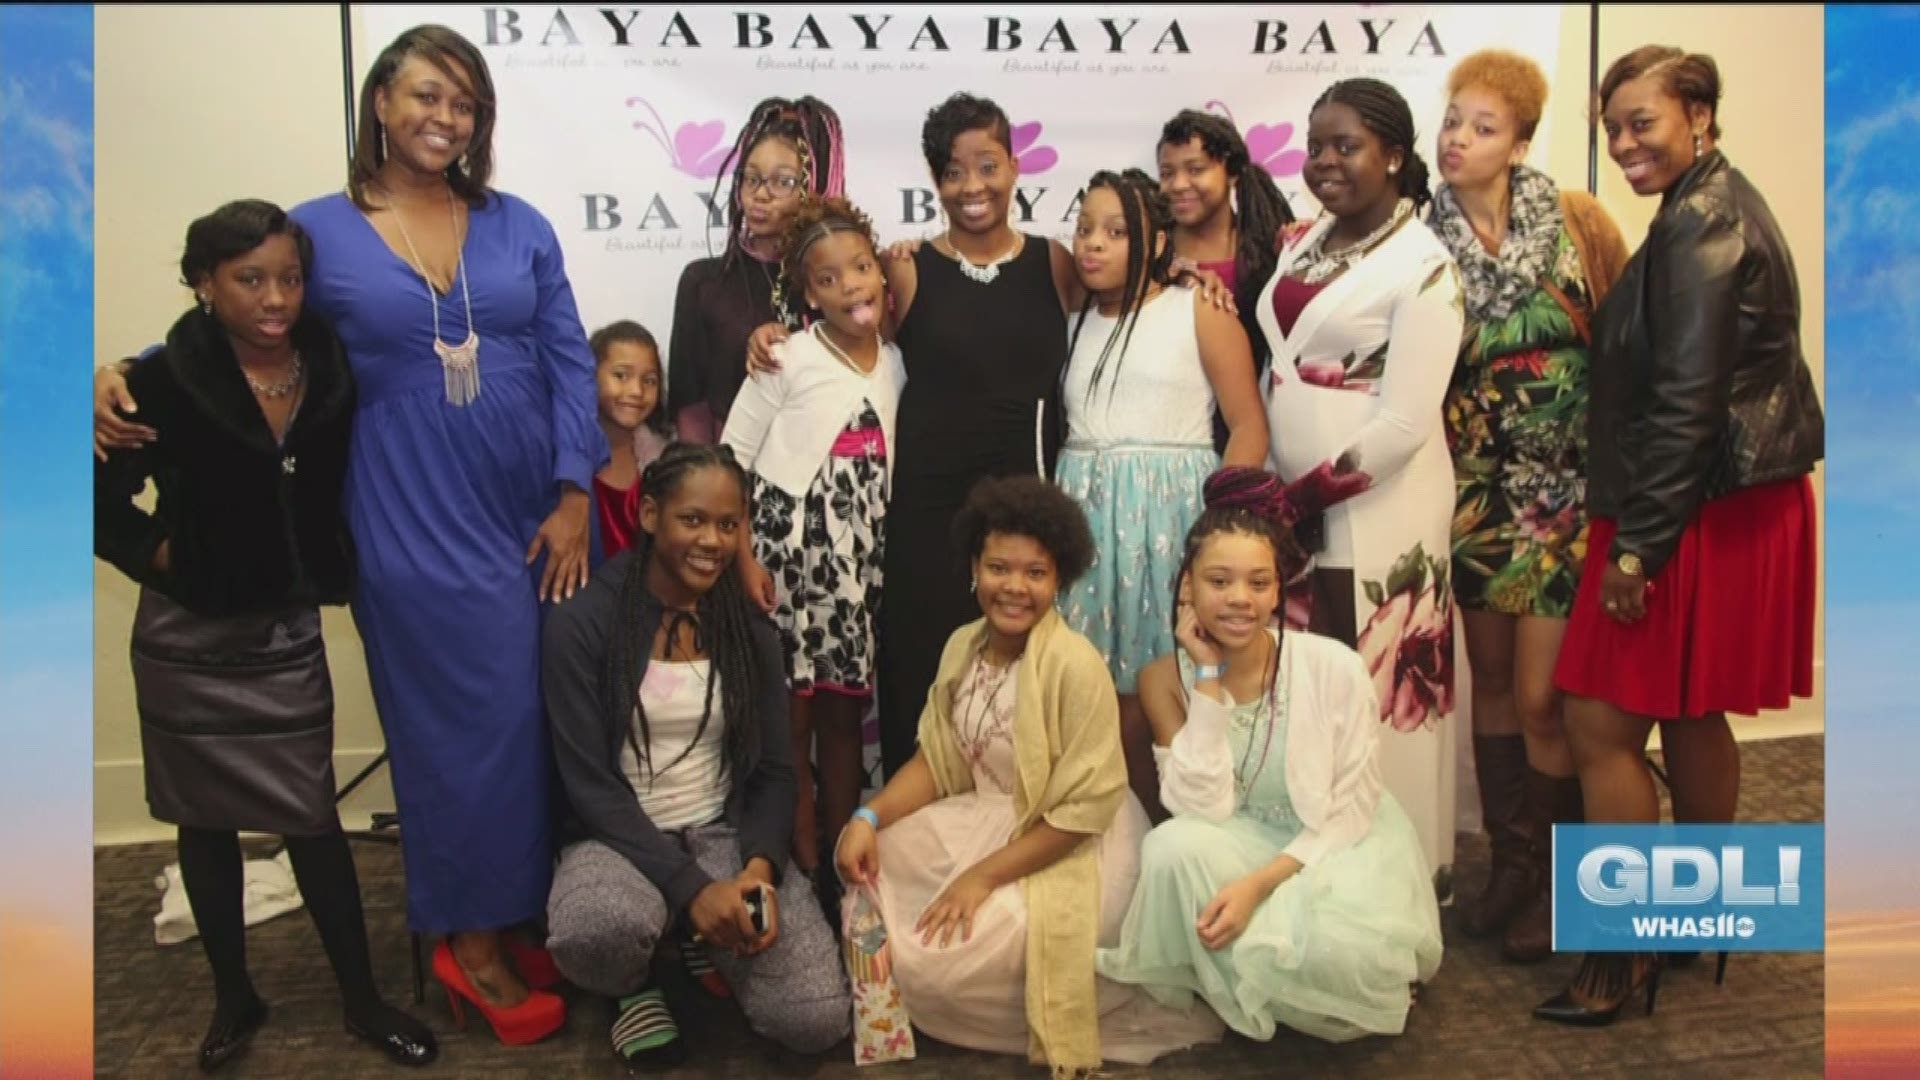 BAYA stands for Beautiful As You Are and is a program that helps girls build self-confidence. The group is asking for dress donations. If you'd like to donate a dress for this November's ball, you can call Tish at 812-558-1397.  To learn more about the program, the website is BAYACorp.org.